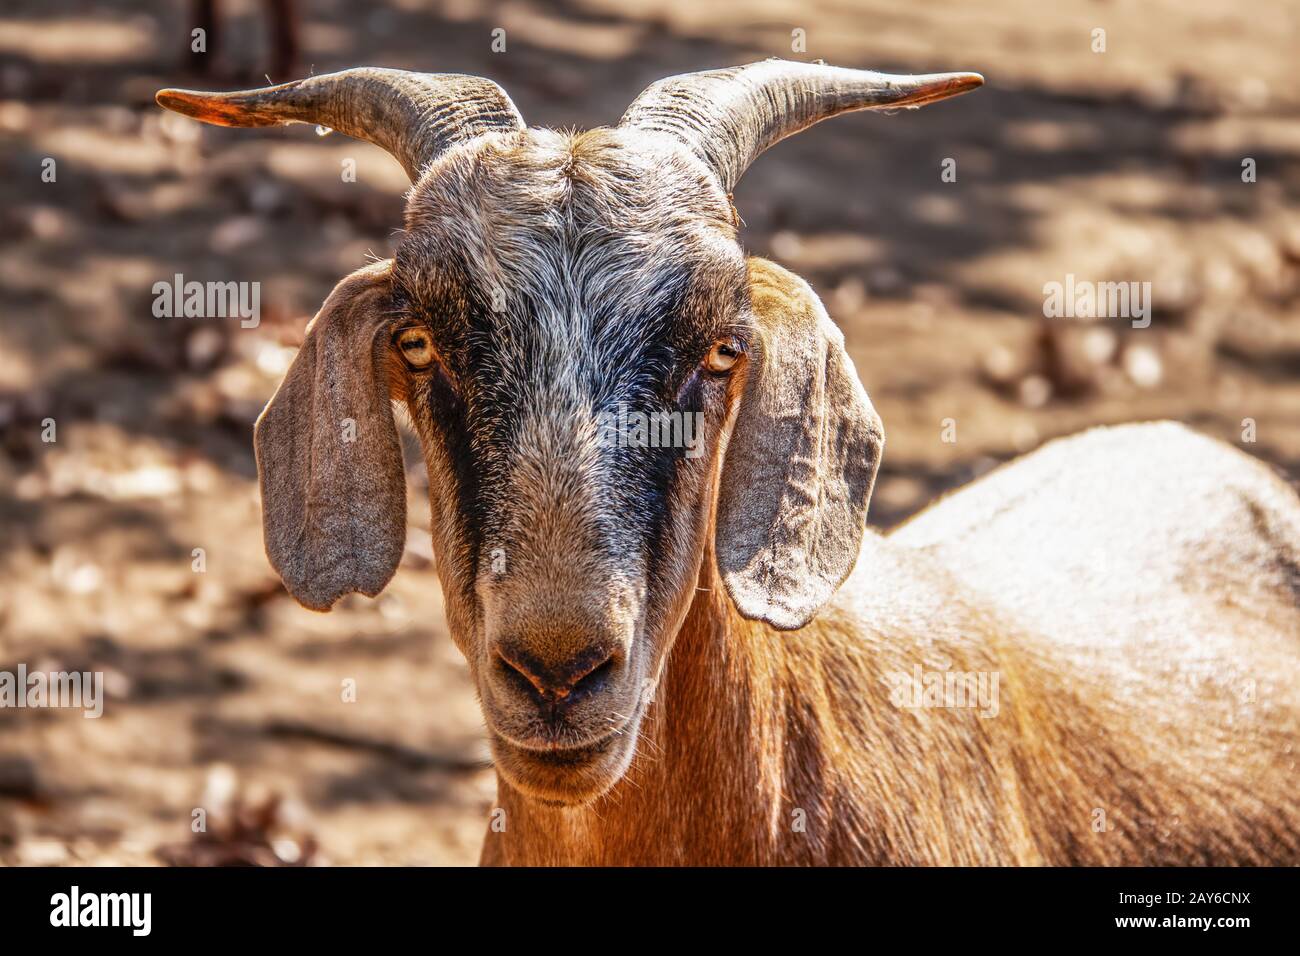 Closeup of horned goat head staring at camera with strange eyes - blurred background Stock Photo